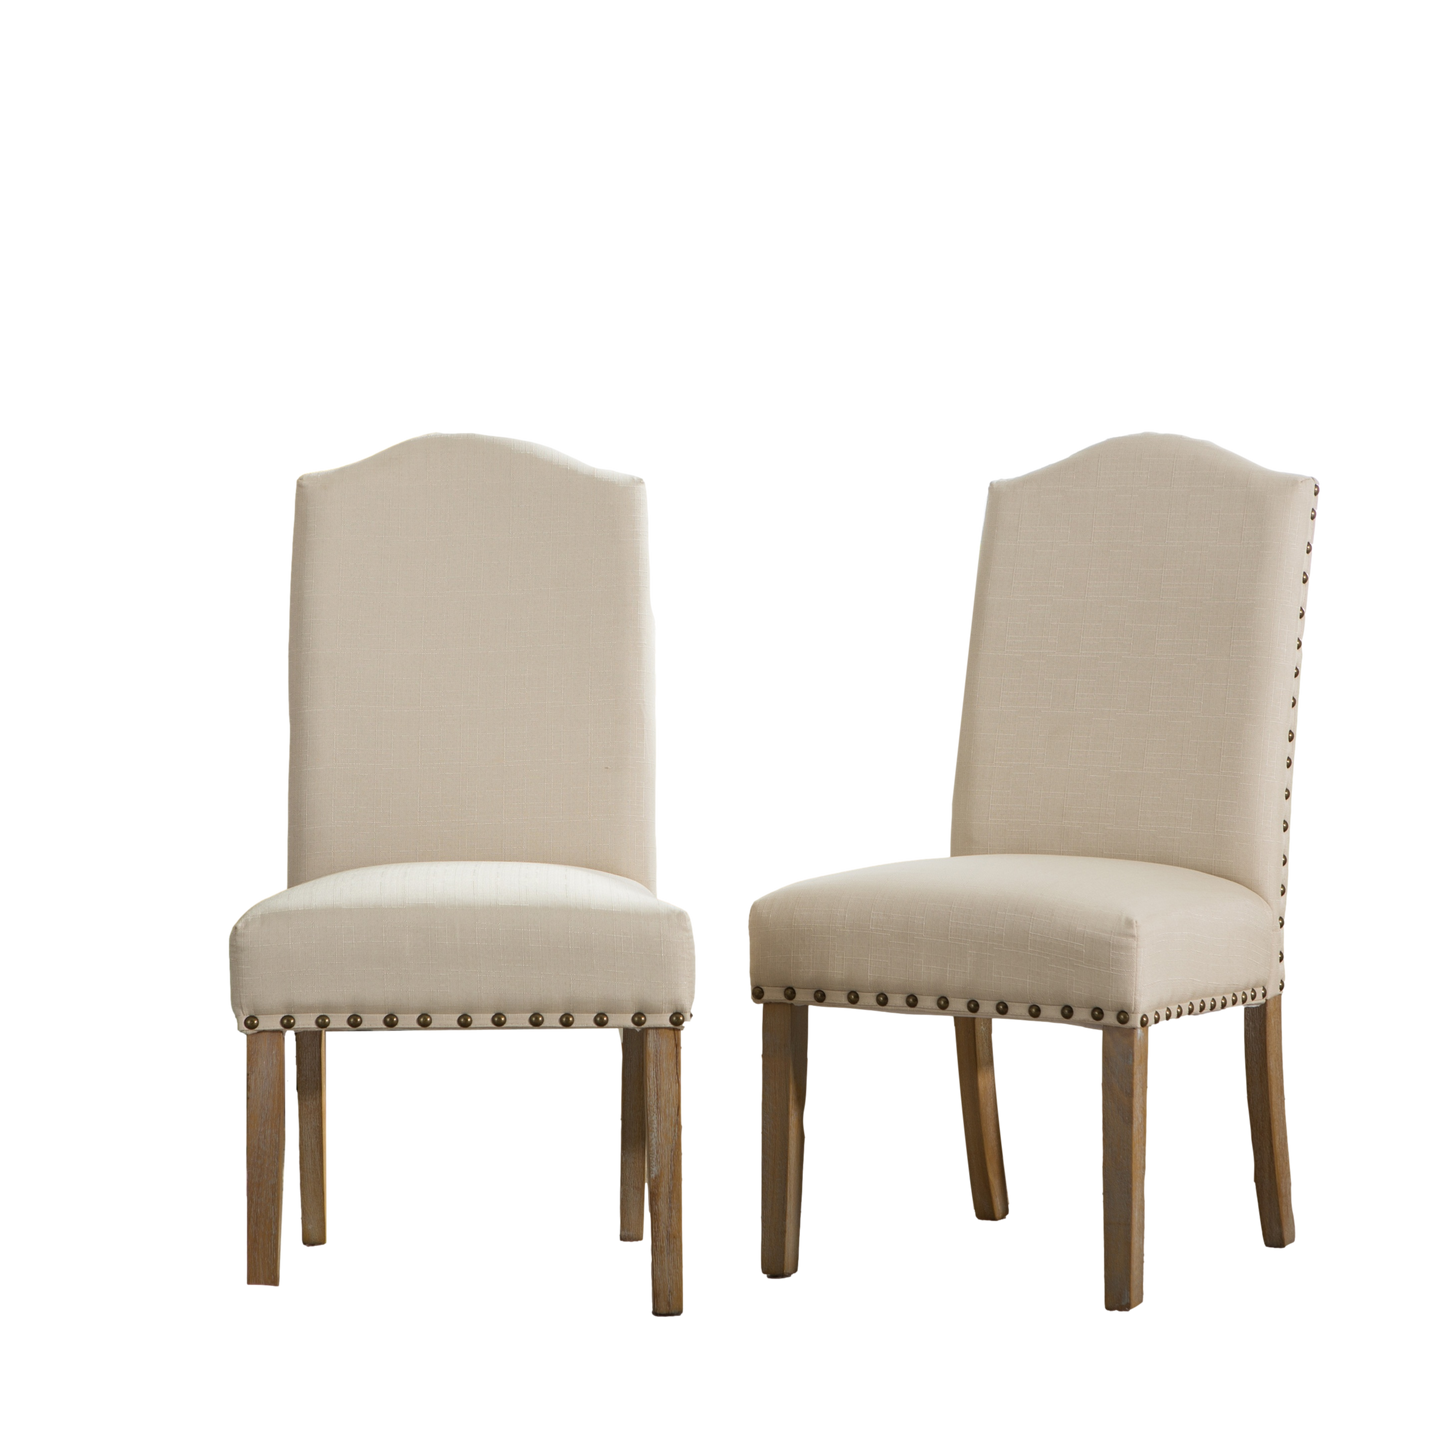 Mod Urban Style Solid Wood Nailhead Tan Fabric Padded Parson Chair, Set of 2